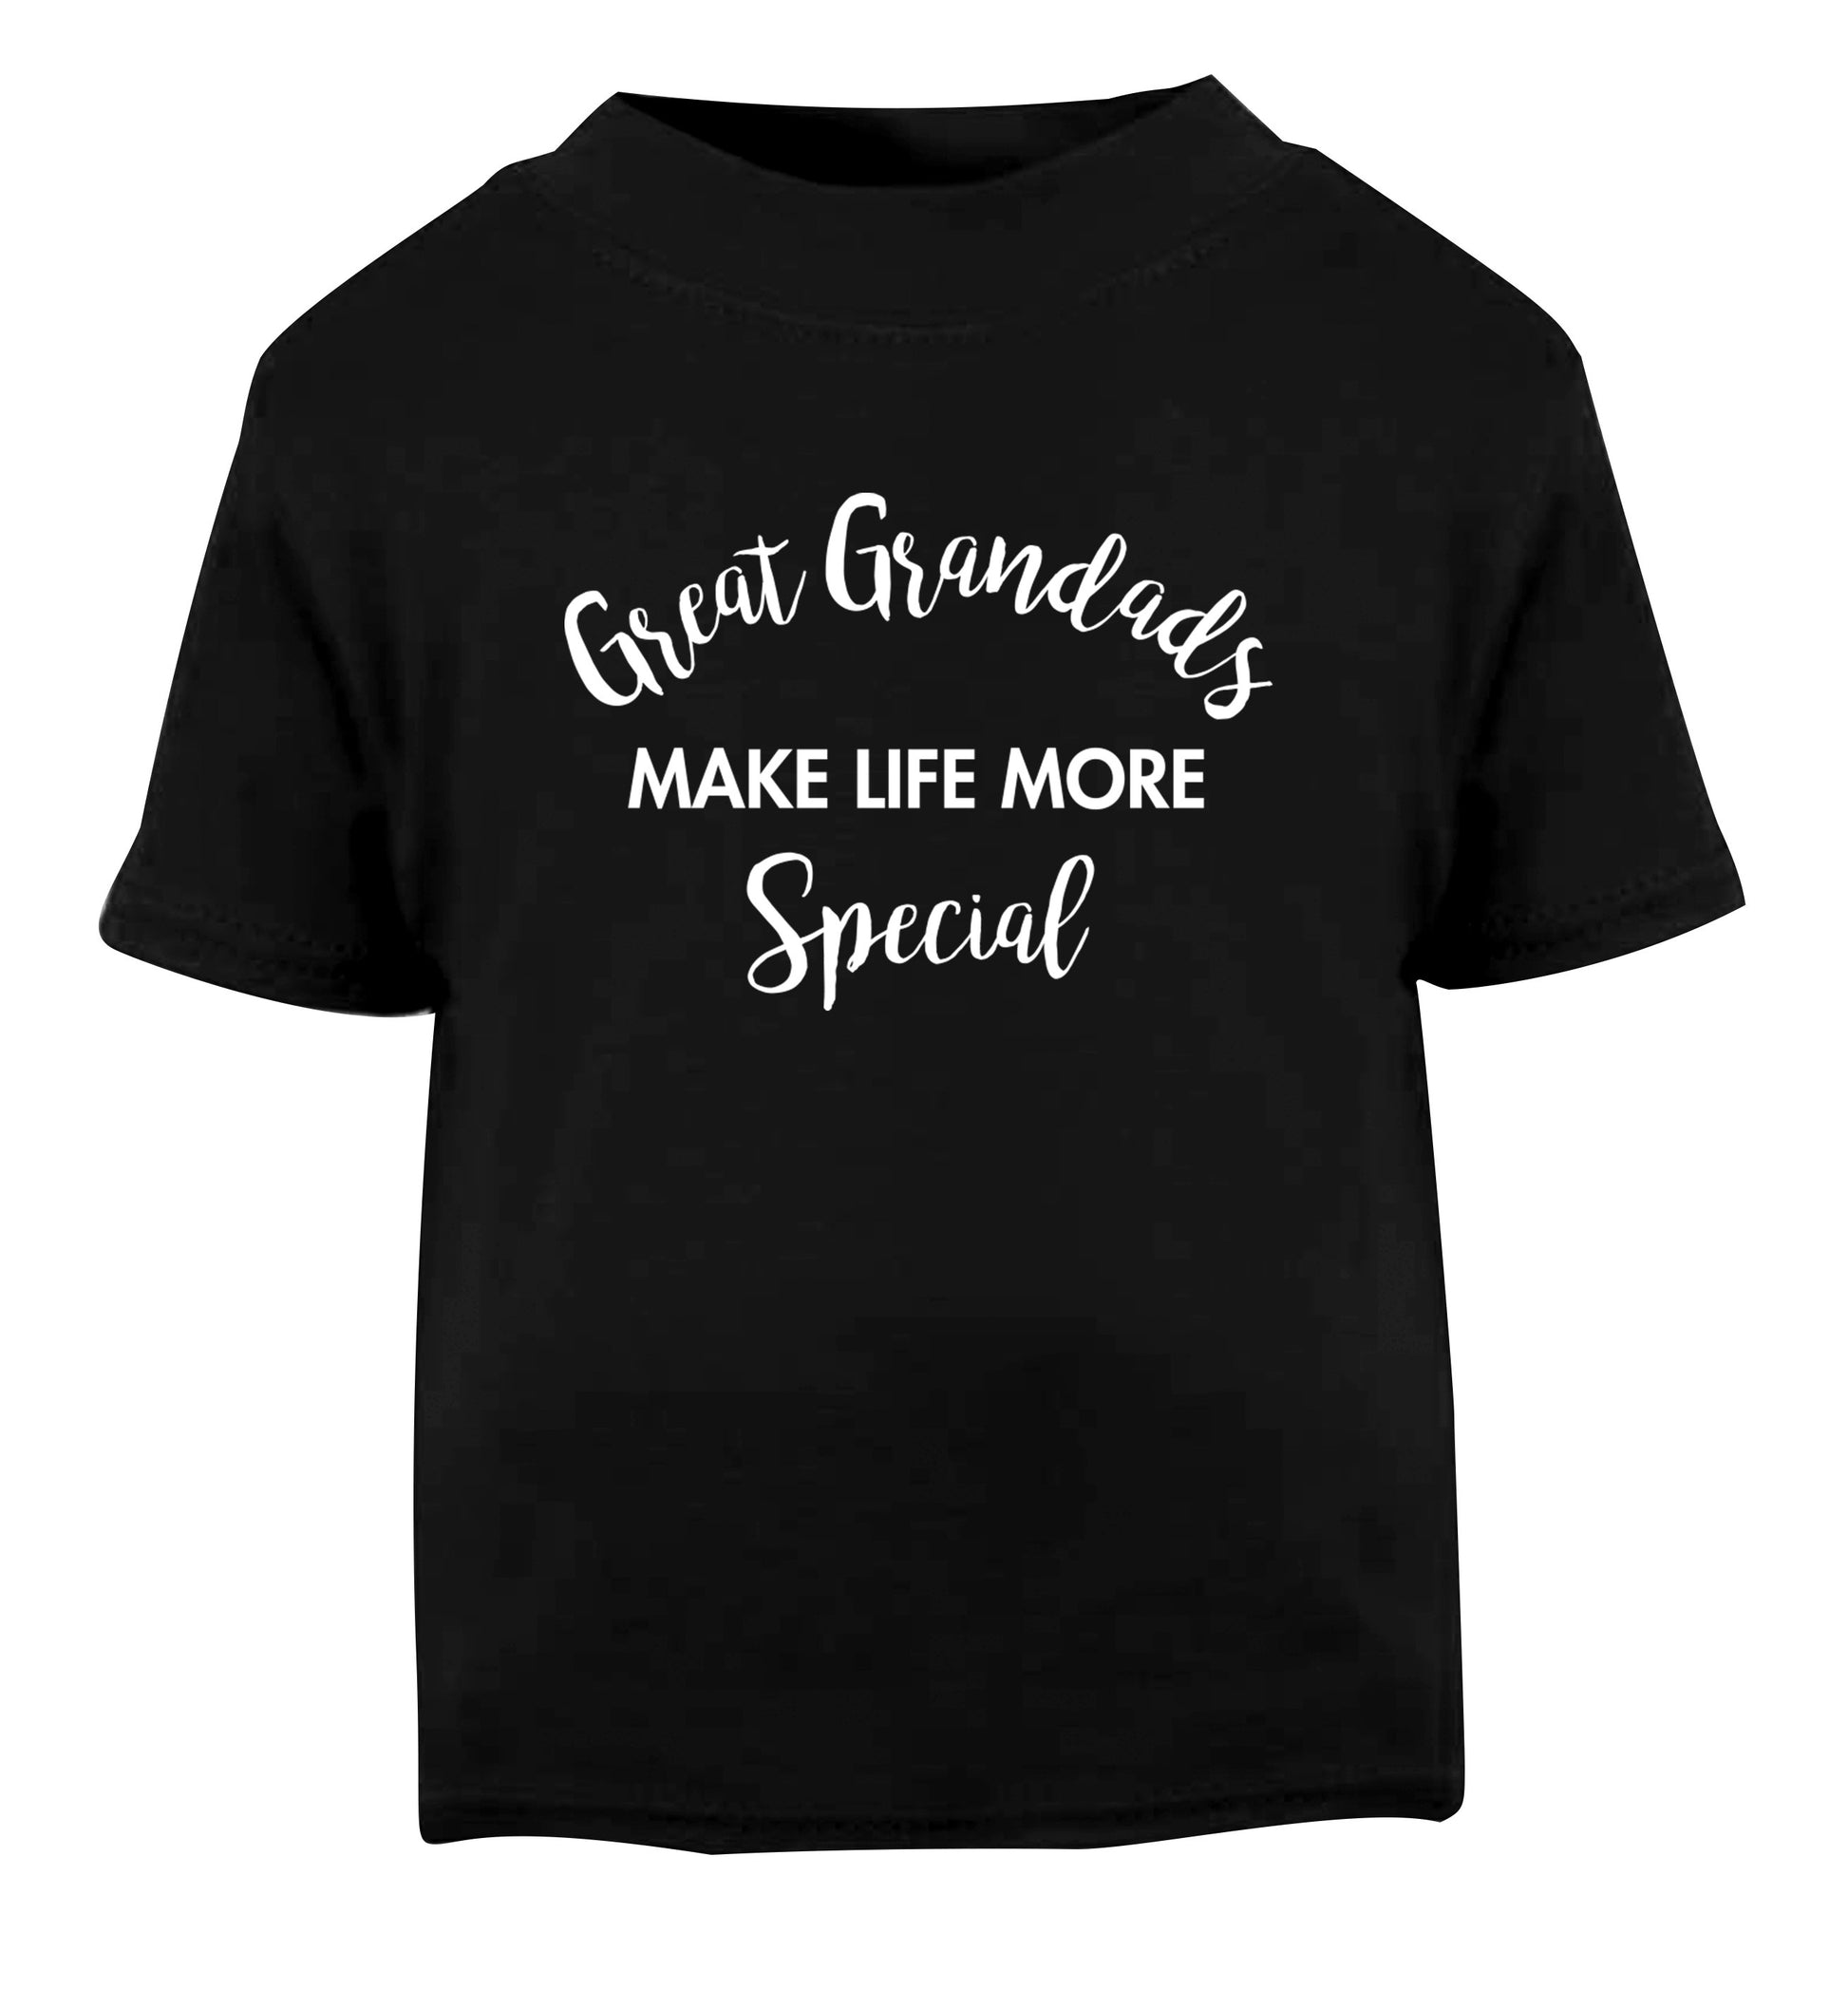 Great Grandads make life more special Black Baby Toddler Tshirt 2 years